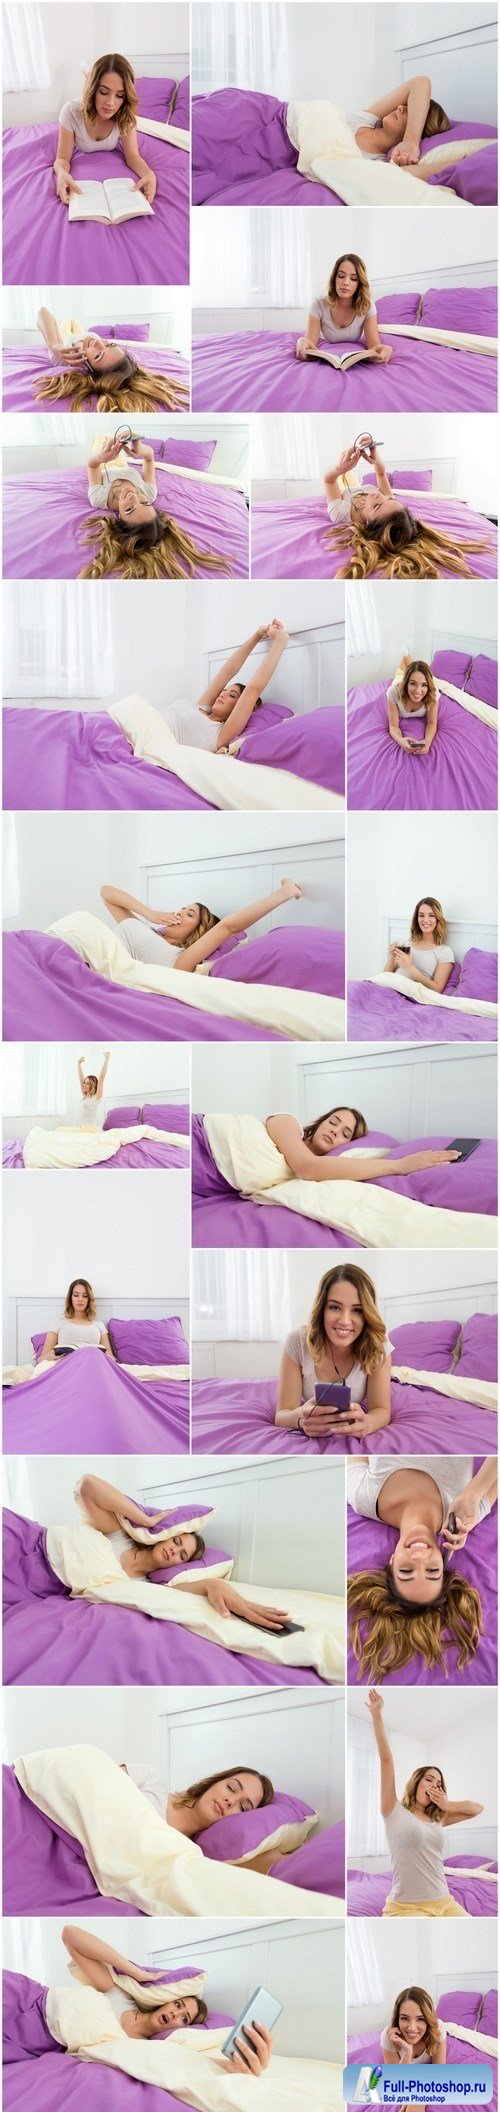 Beautiful young woman is sleeping in bed 2 - Set of 20xUHQ JPEG JPEG Professional Stock Images